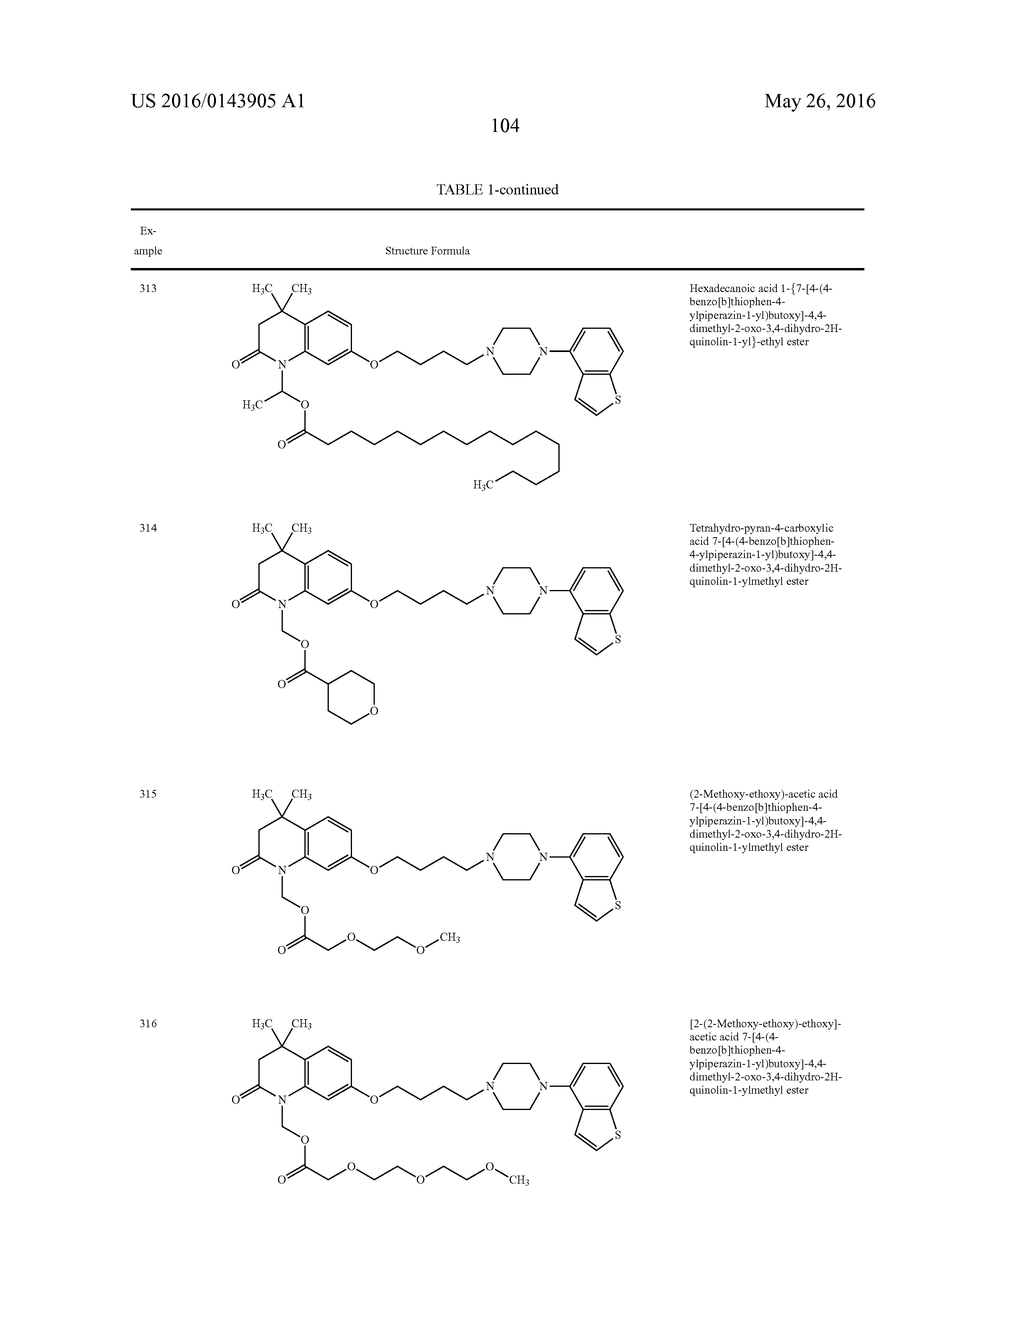 PIPERAZINE-SUBSTITUTED BENZOTHIOPHENE DERIVATIVES AS ANTIPSYCHOTIC AGENTS - diagram, schematic, and image 106